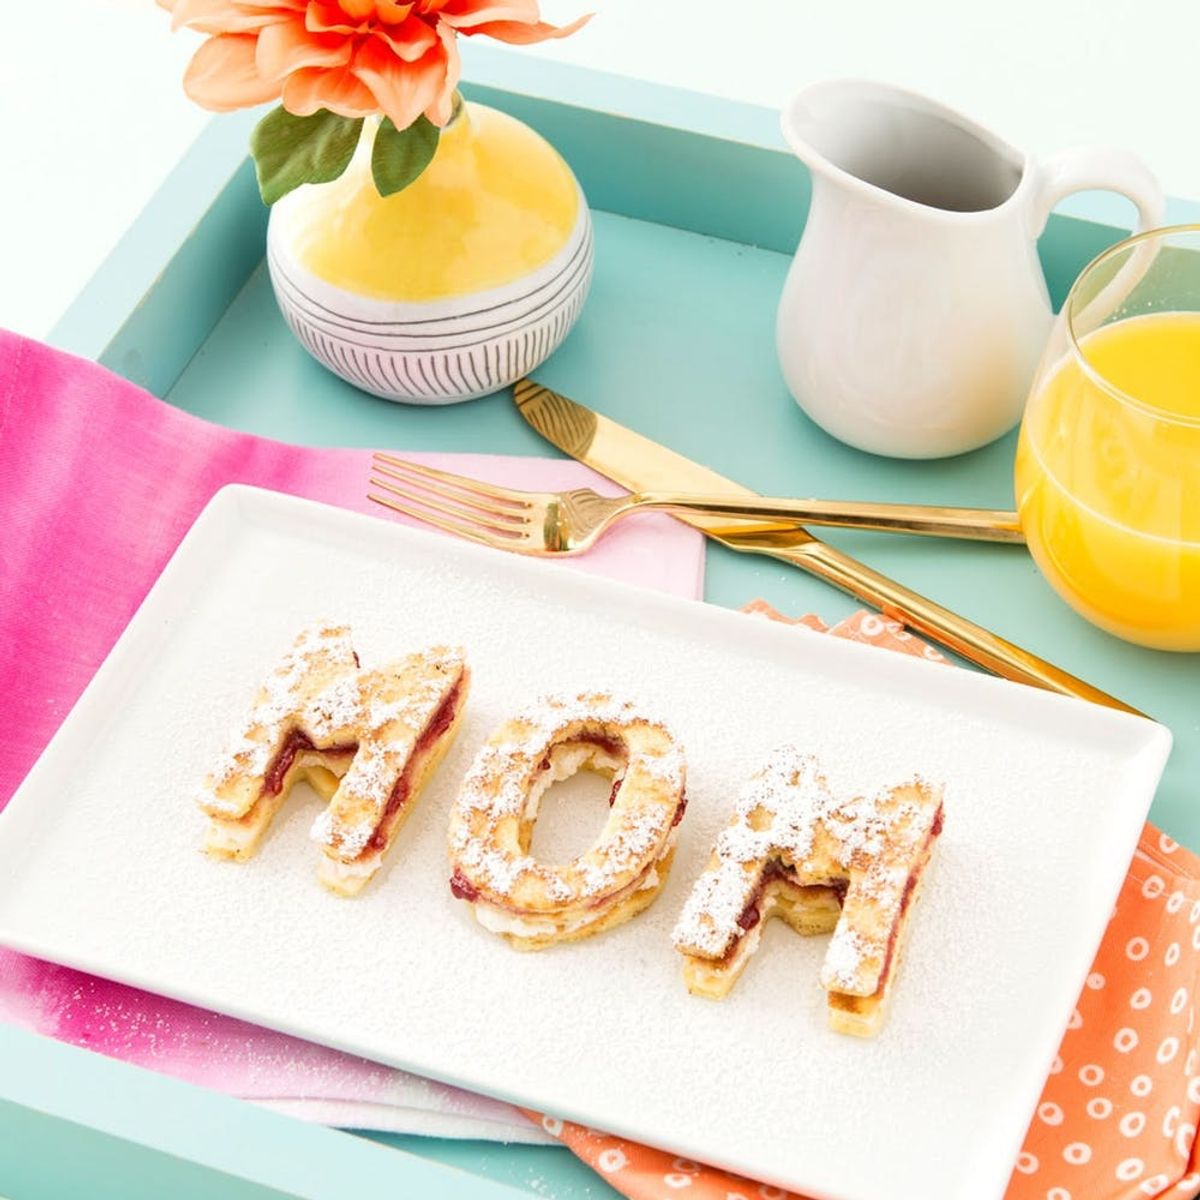 How to Make Mom the Best Brunch on a $20 Budget